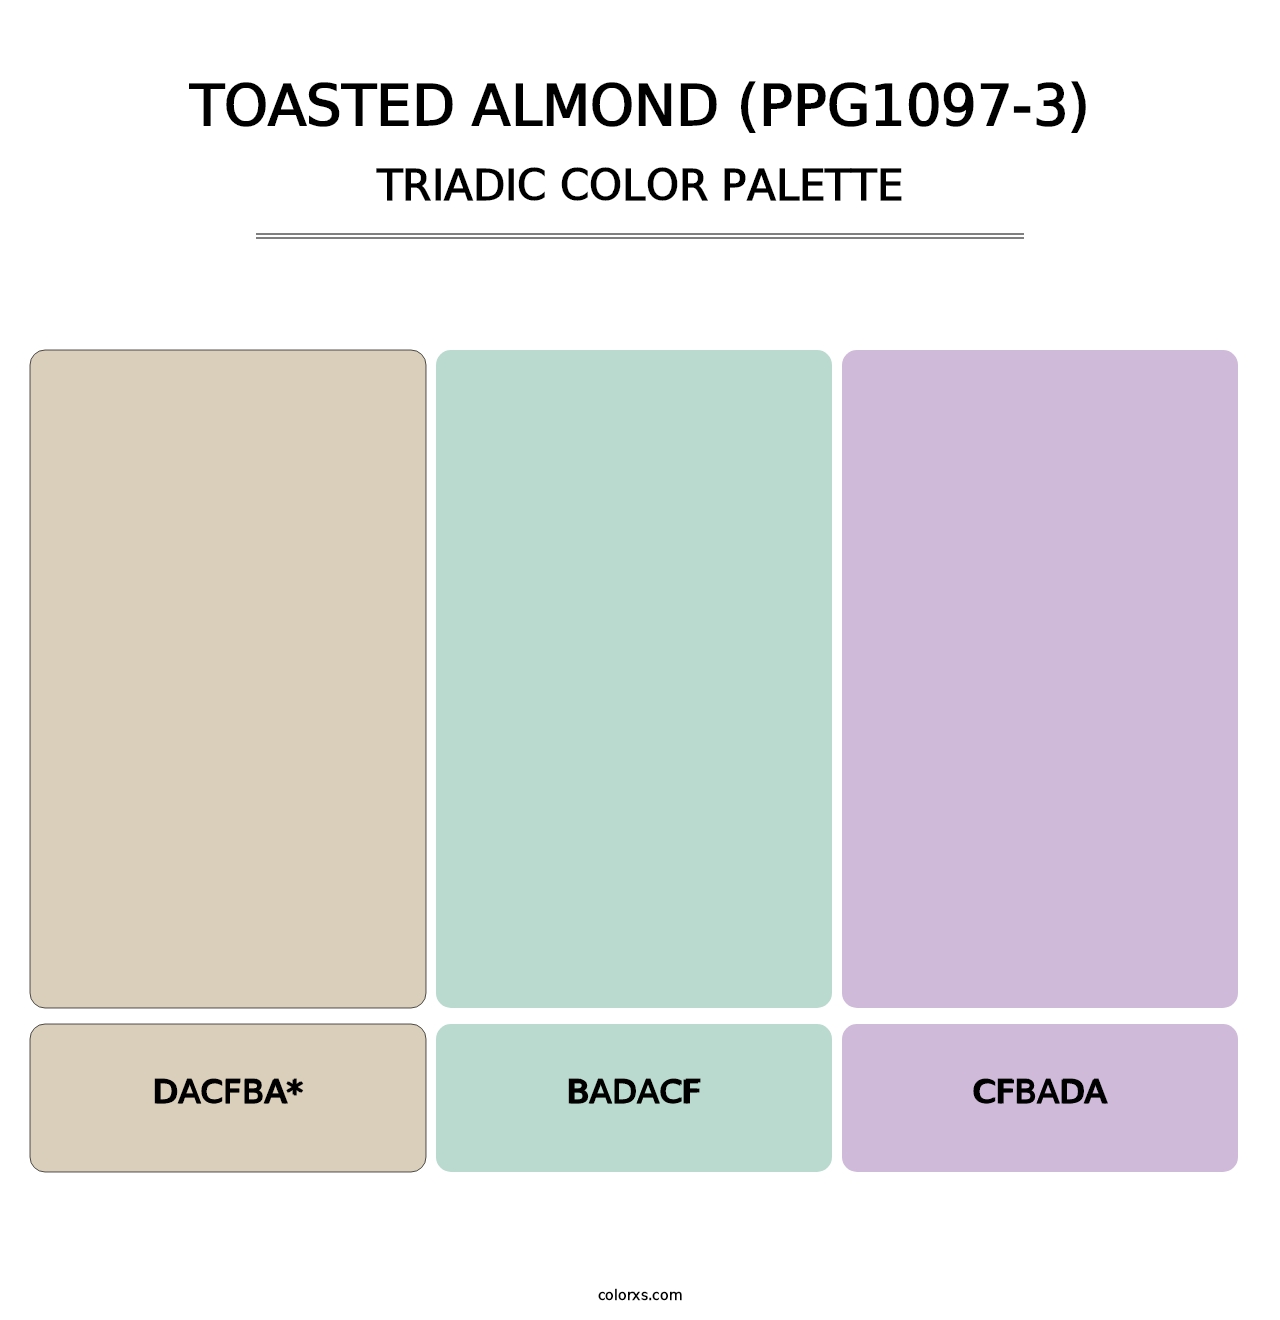 Toasted Almond (PPG1097-3) - Triadic Color Palette